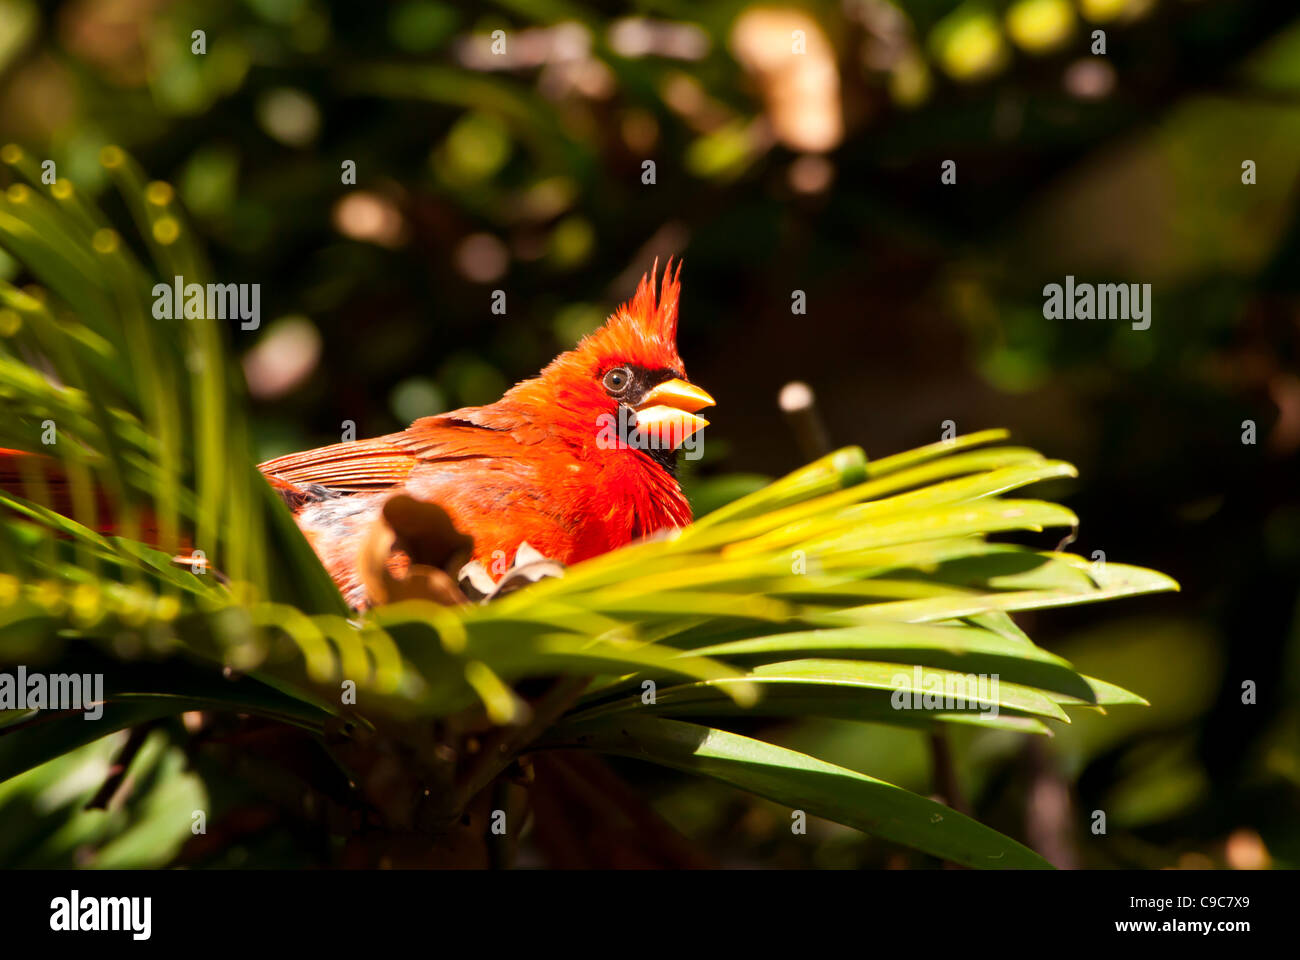 Red cardinal resting on green leaves, Hawaii Stock Photo